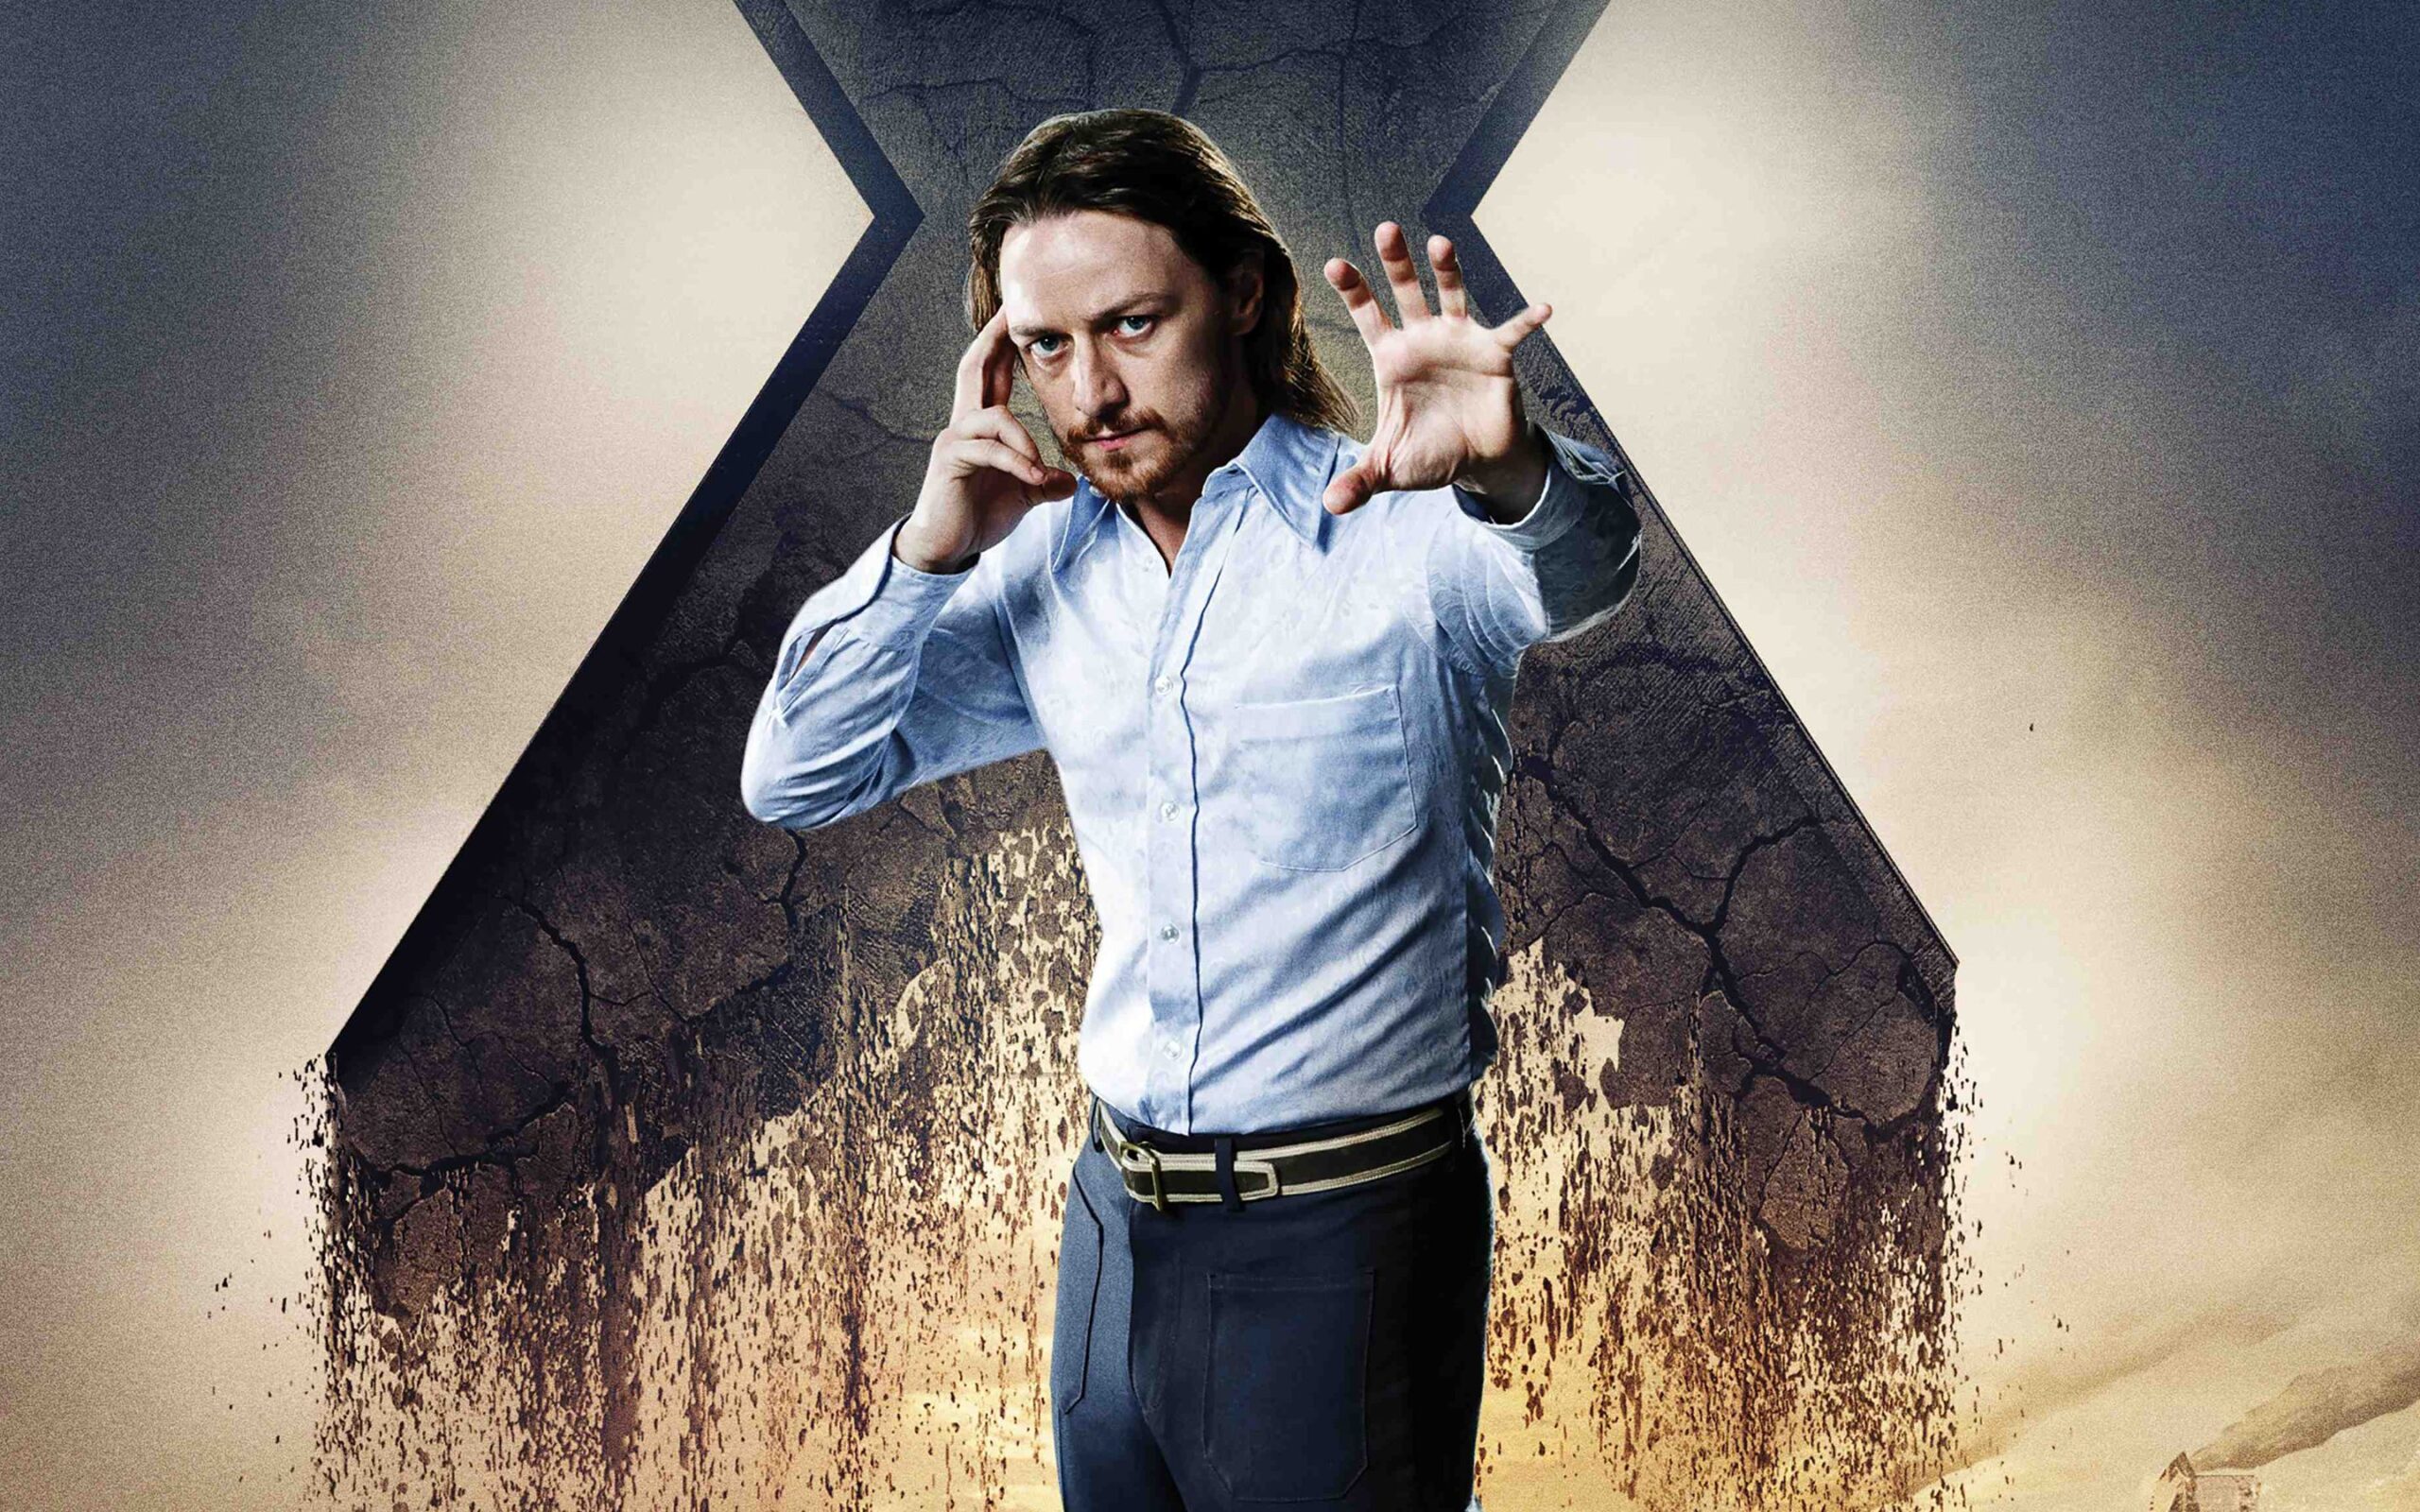 James McAvoy as Charles Xavier Wallpapers